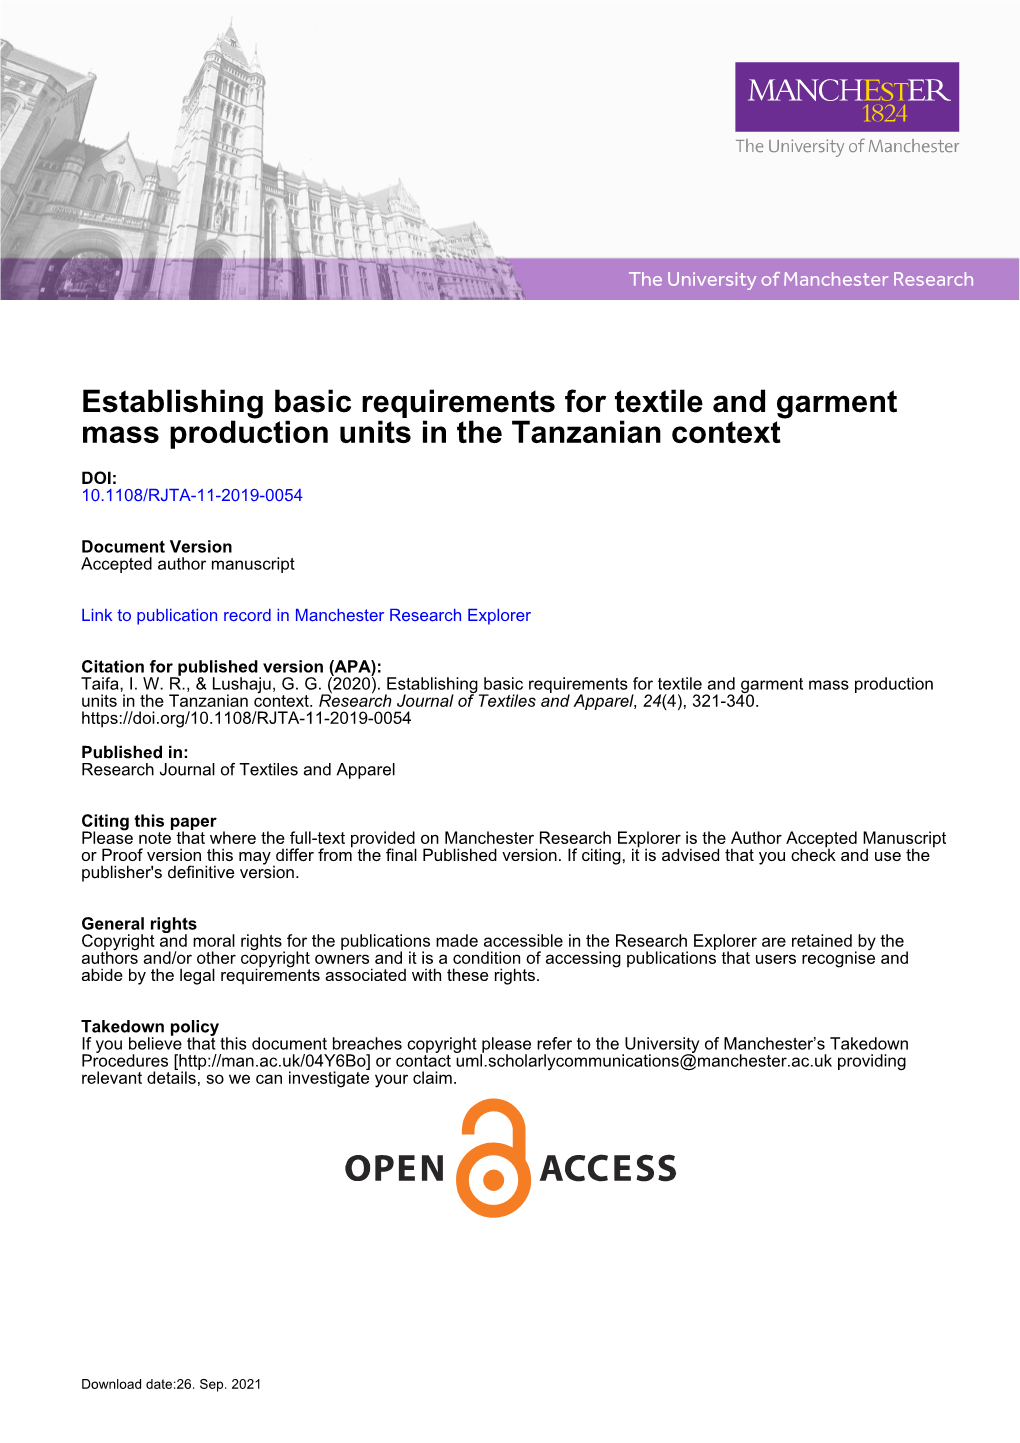 Establishing Basic Requirements for Textile and Garment Mass Production Units in the Tanzanian Context